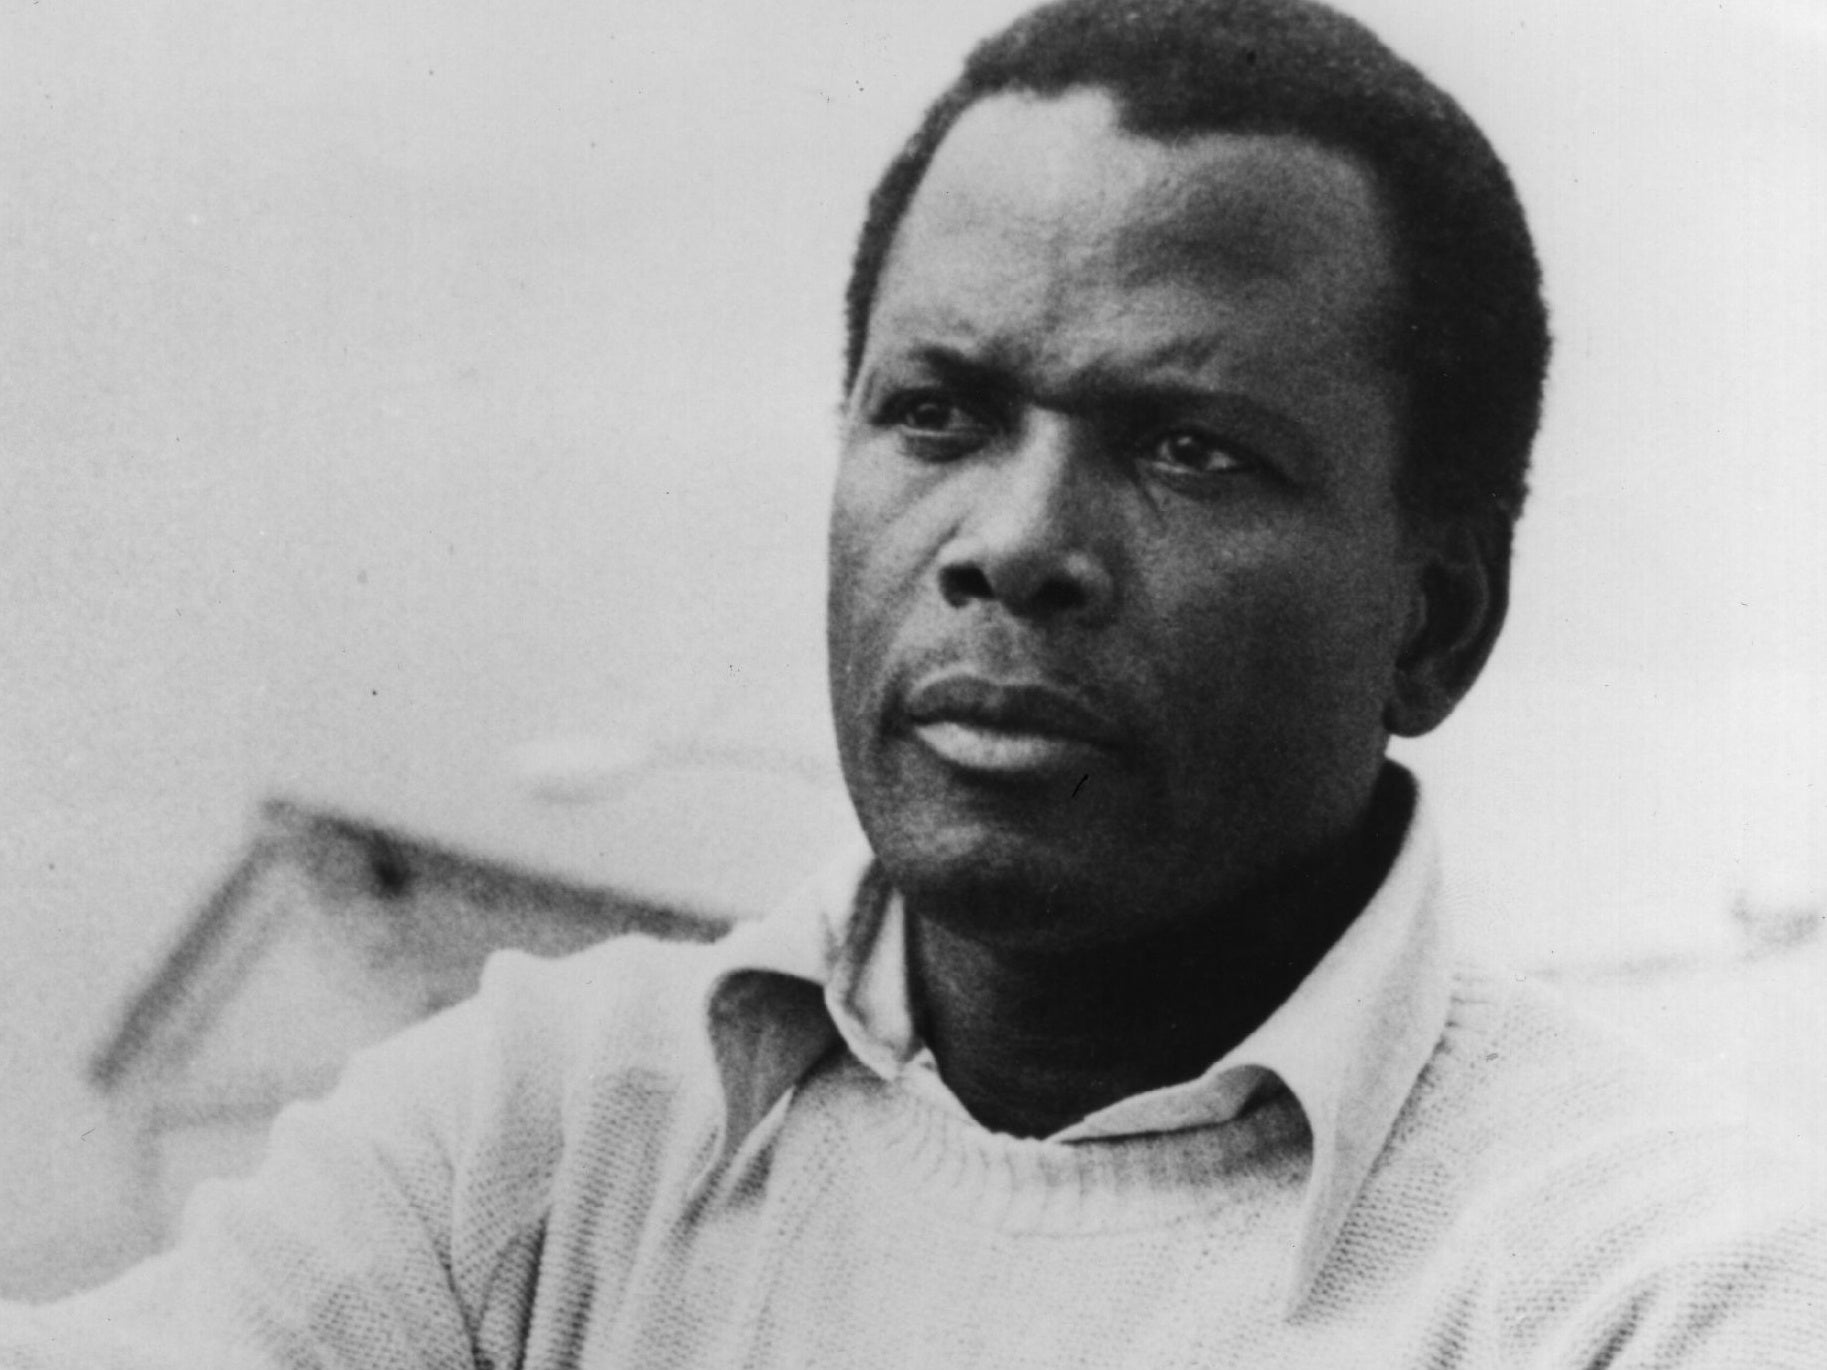 Sidney Poitier's Family Details Plans For His Memorial Service